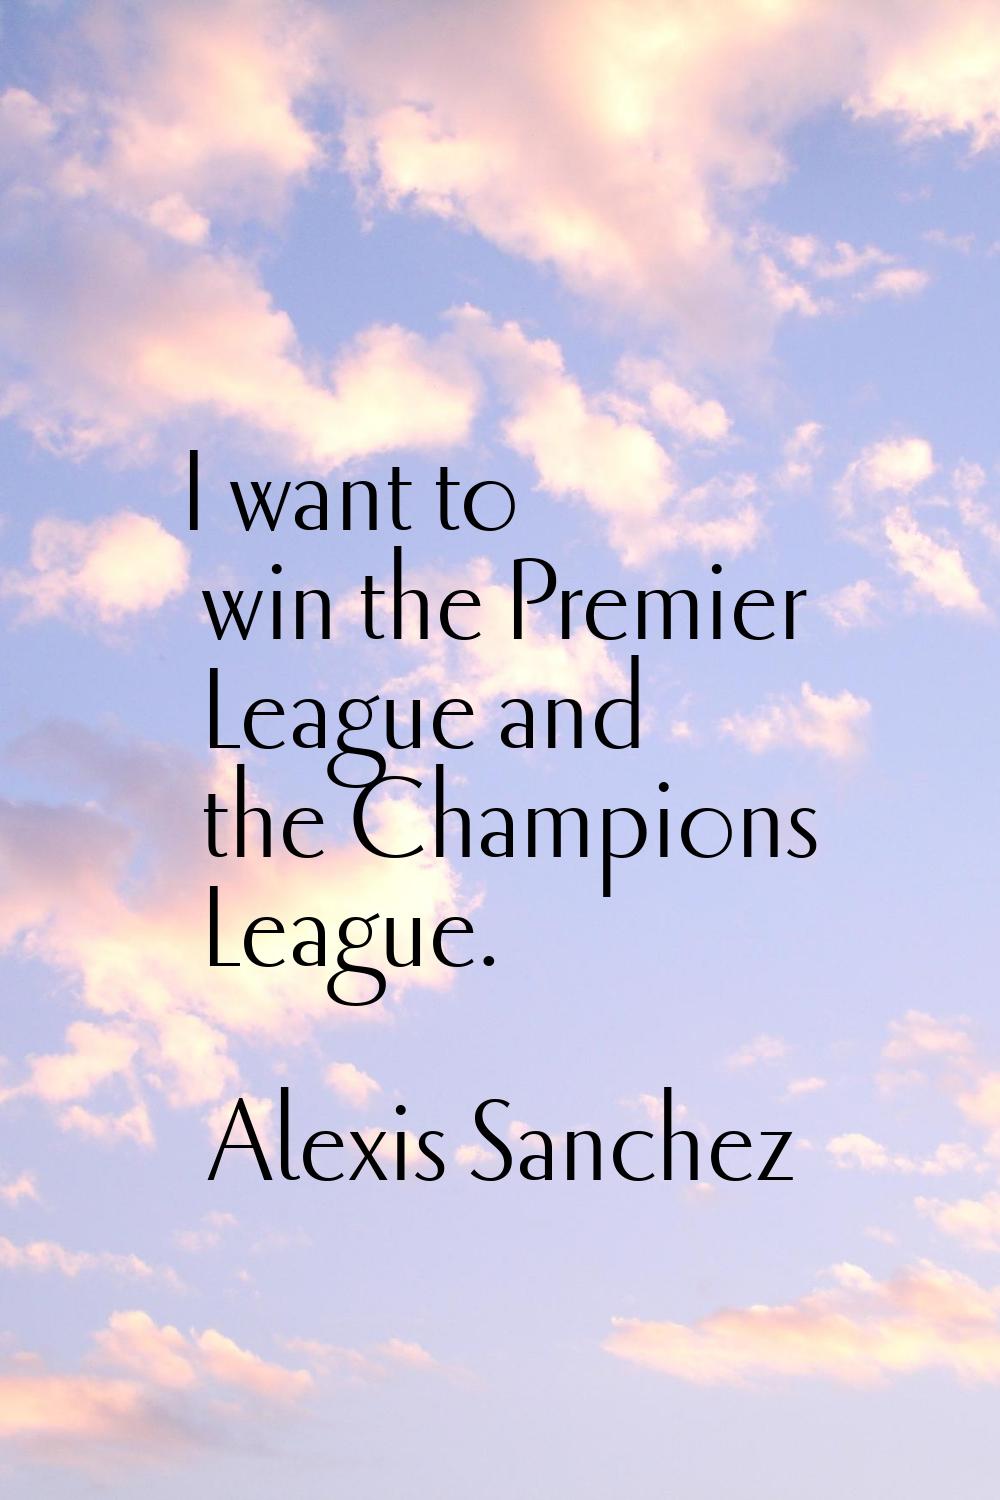 I want to win the Premier League and the Champions League.